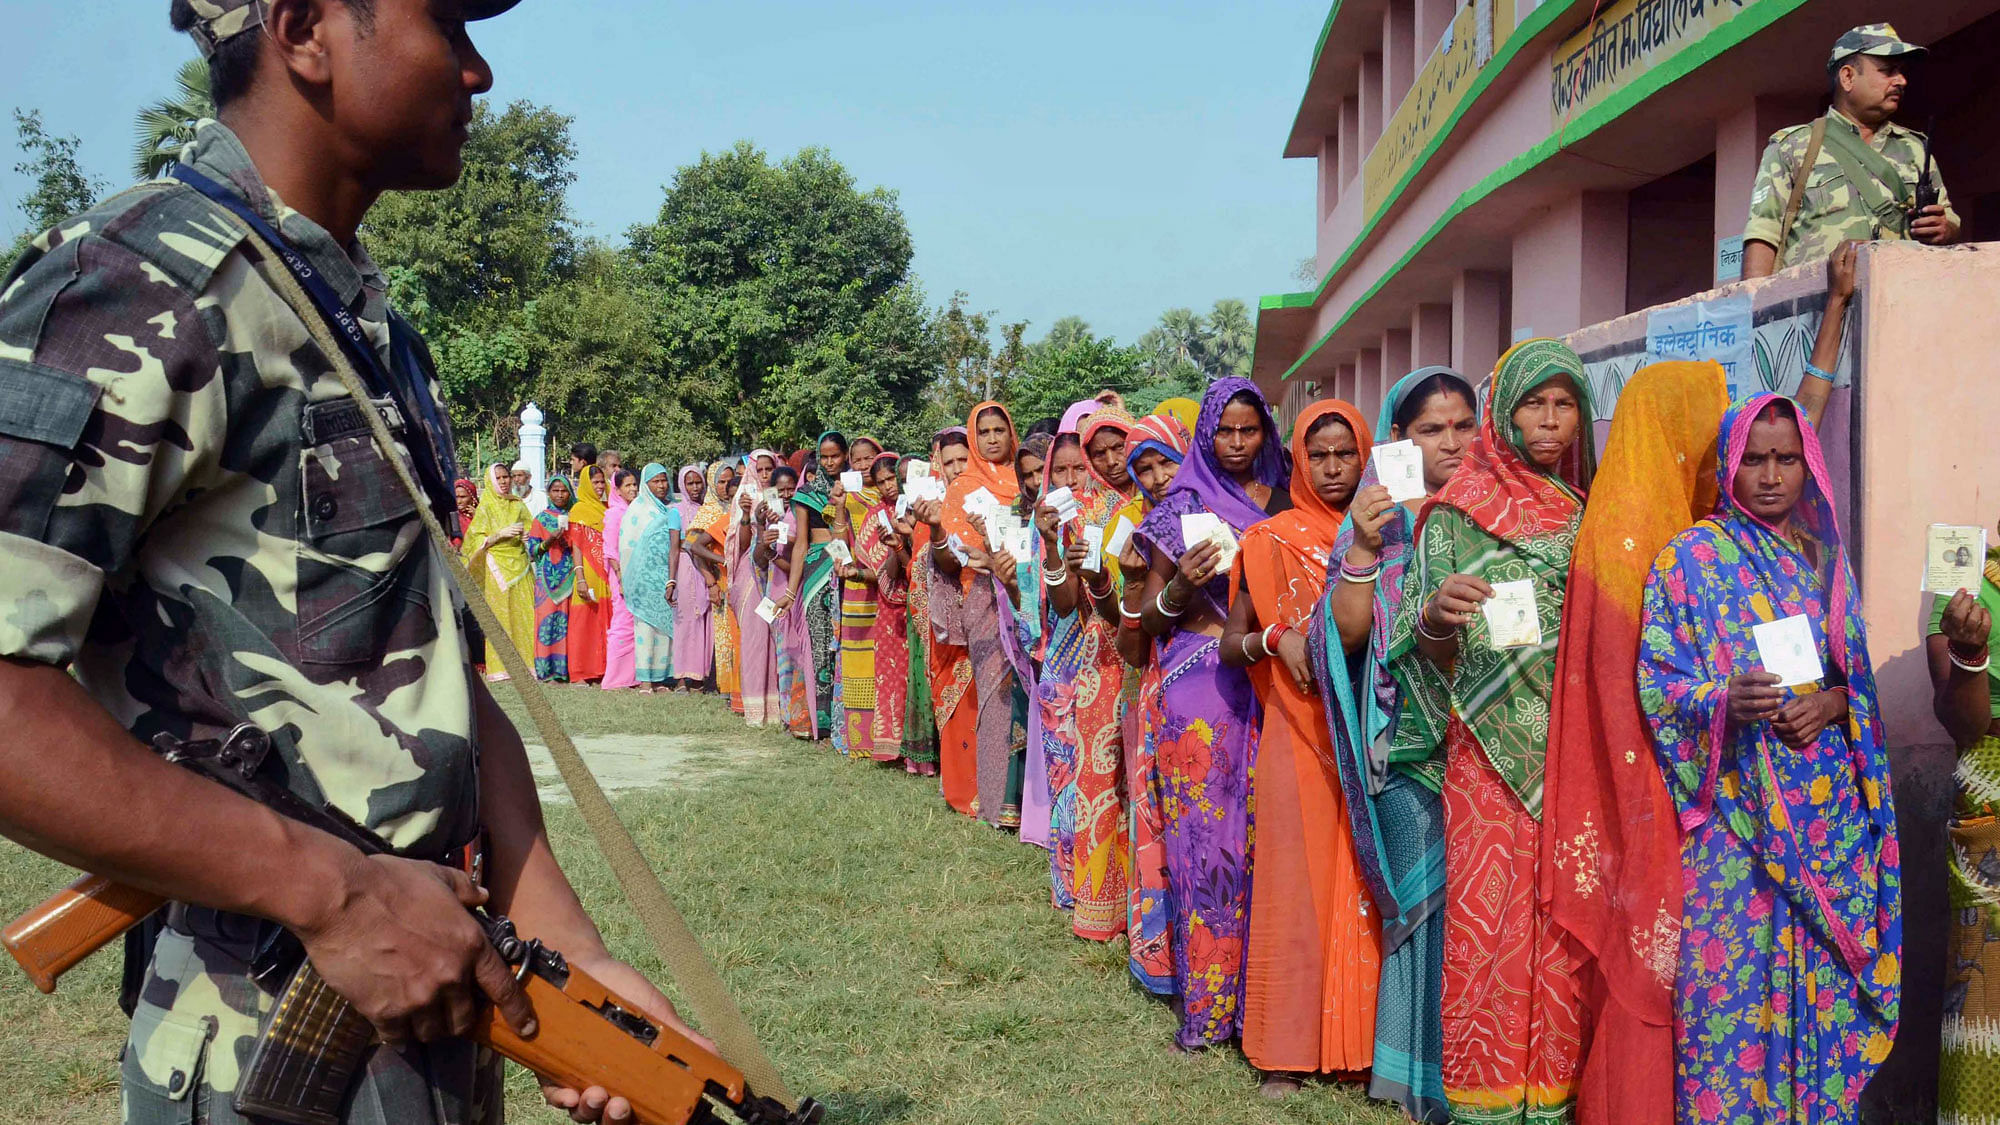 Women lining up to poll. (Photo: AP)